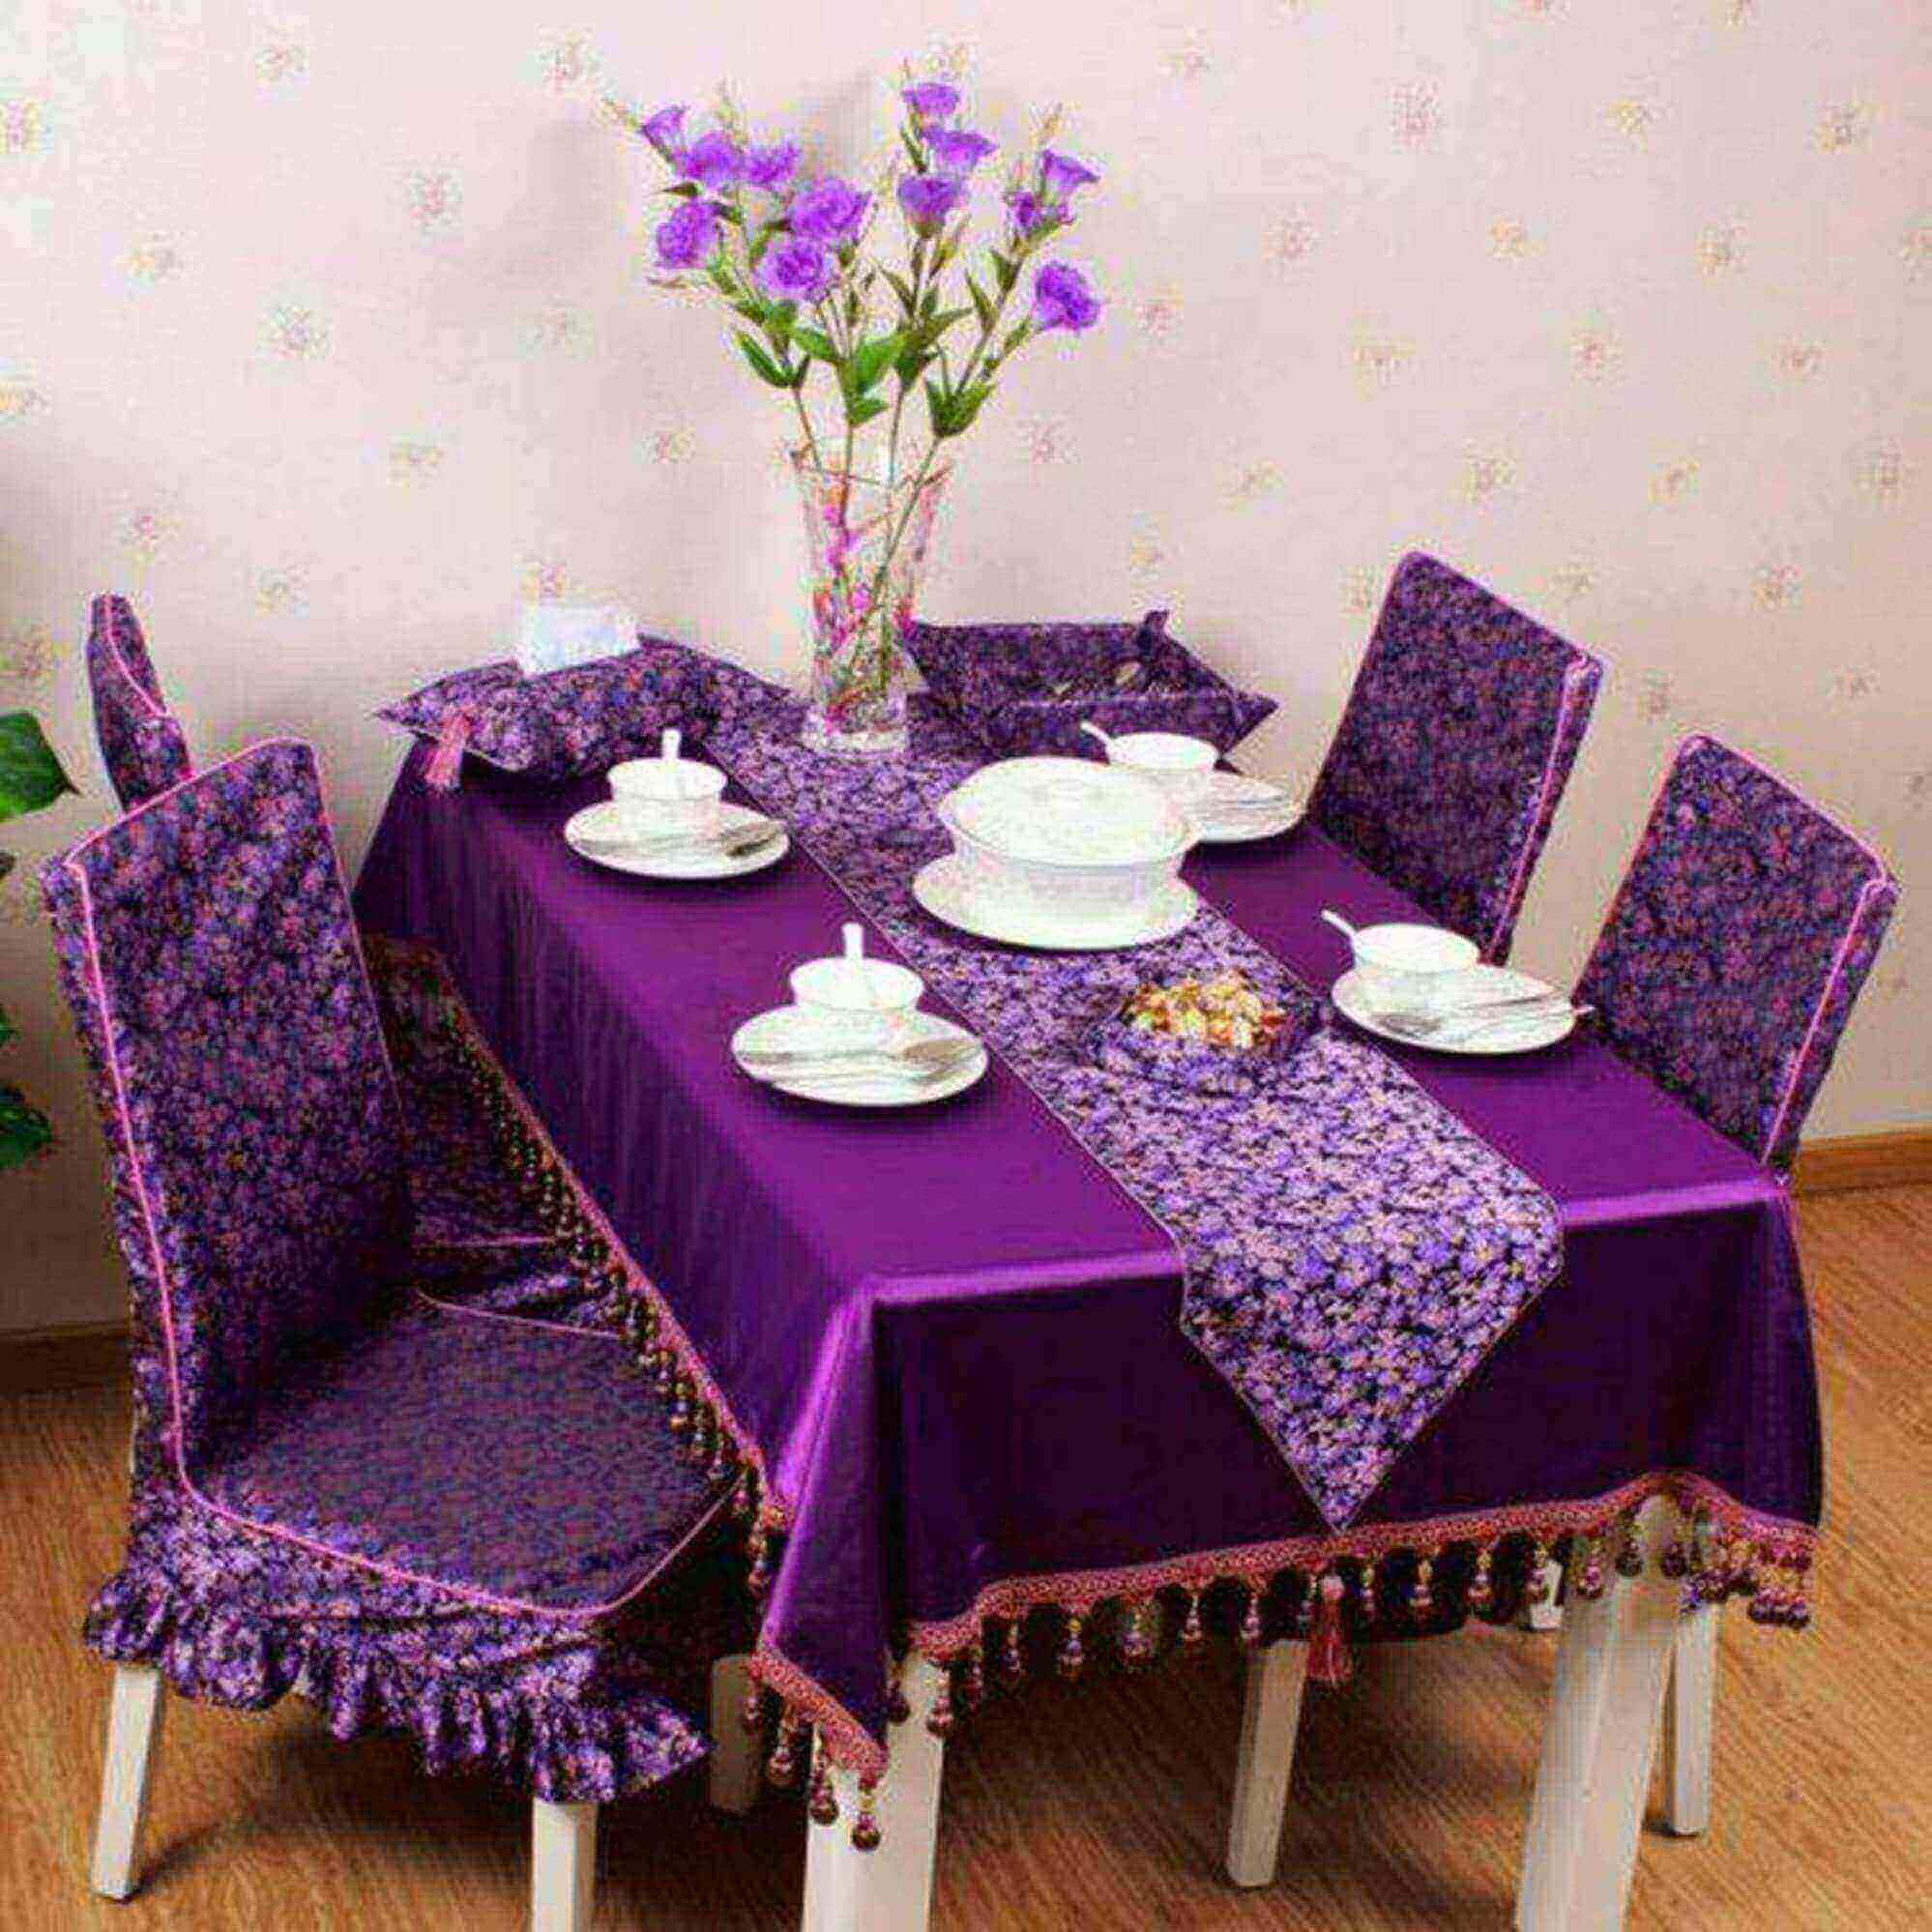 Stunning Table Cloth Designs Ideas To, Dining Room Tablecloth Ideas